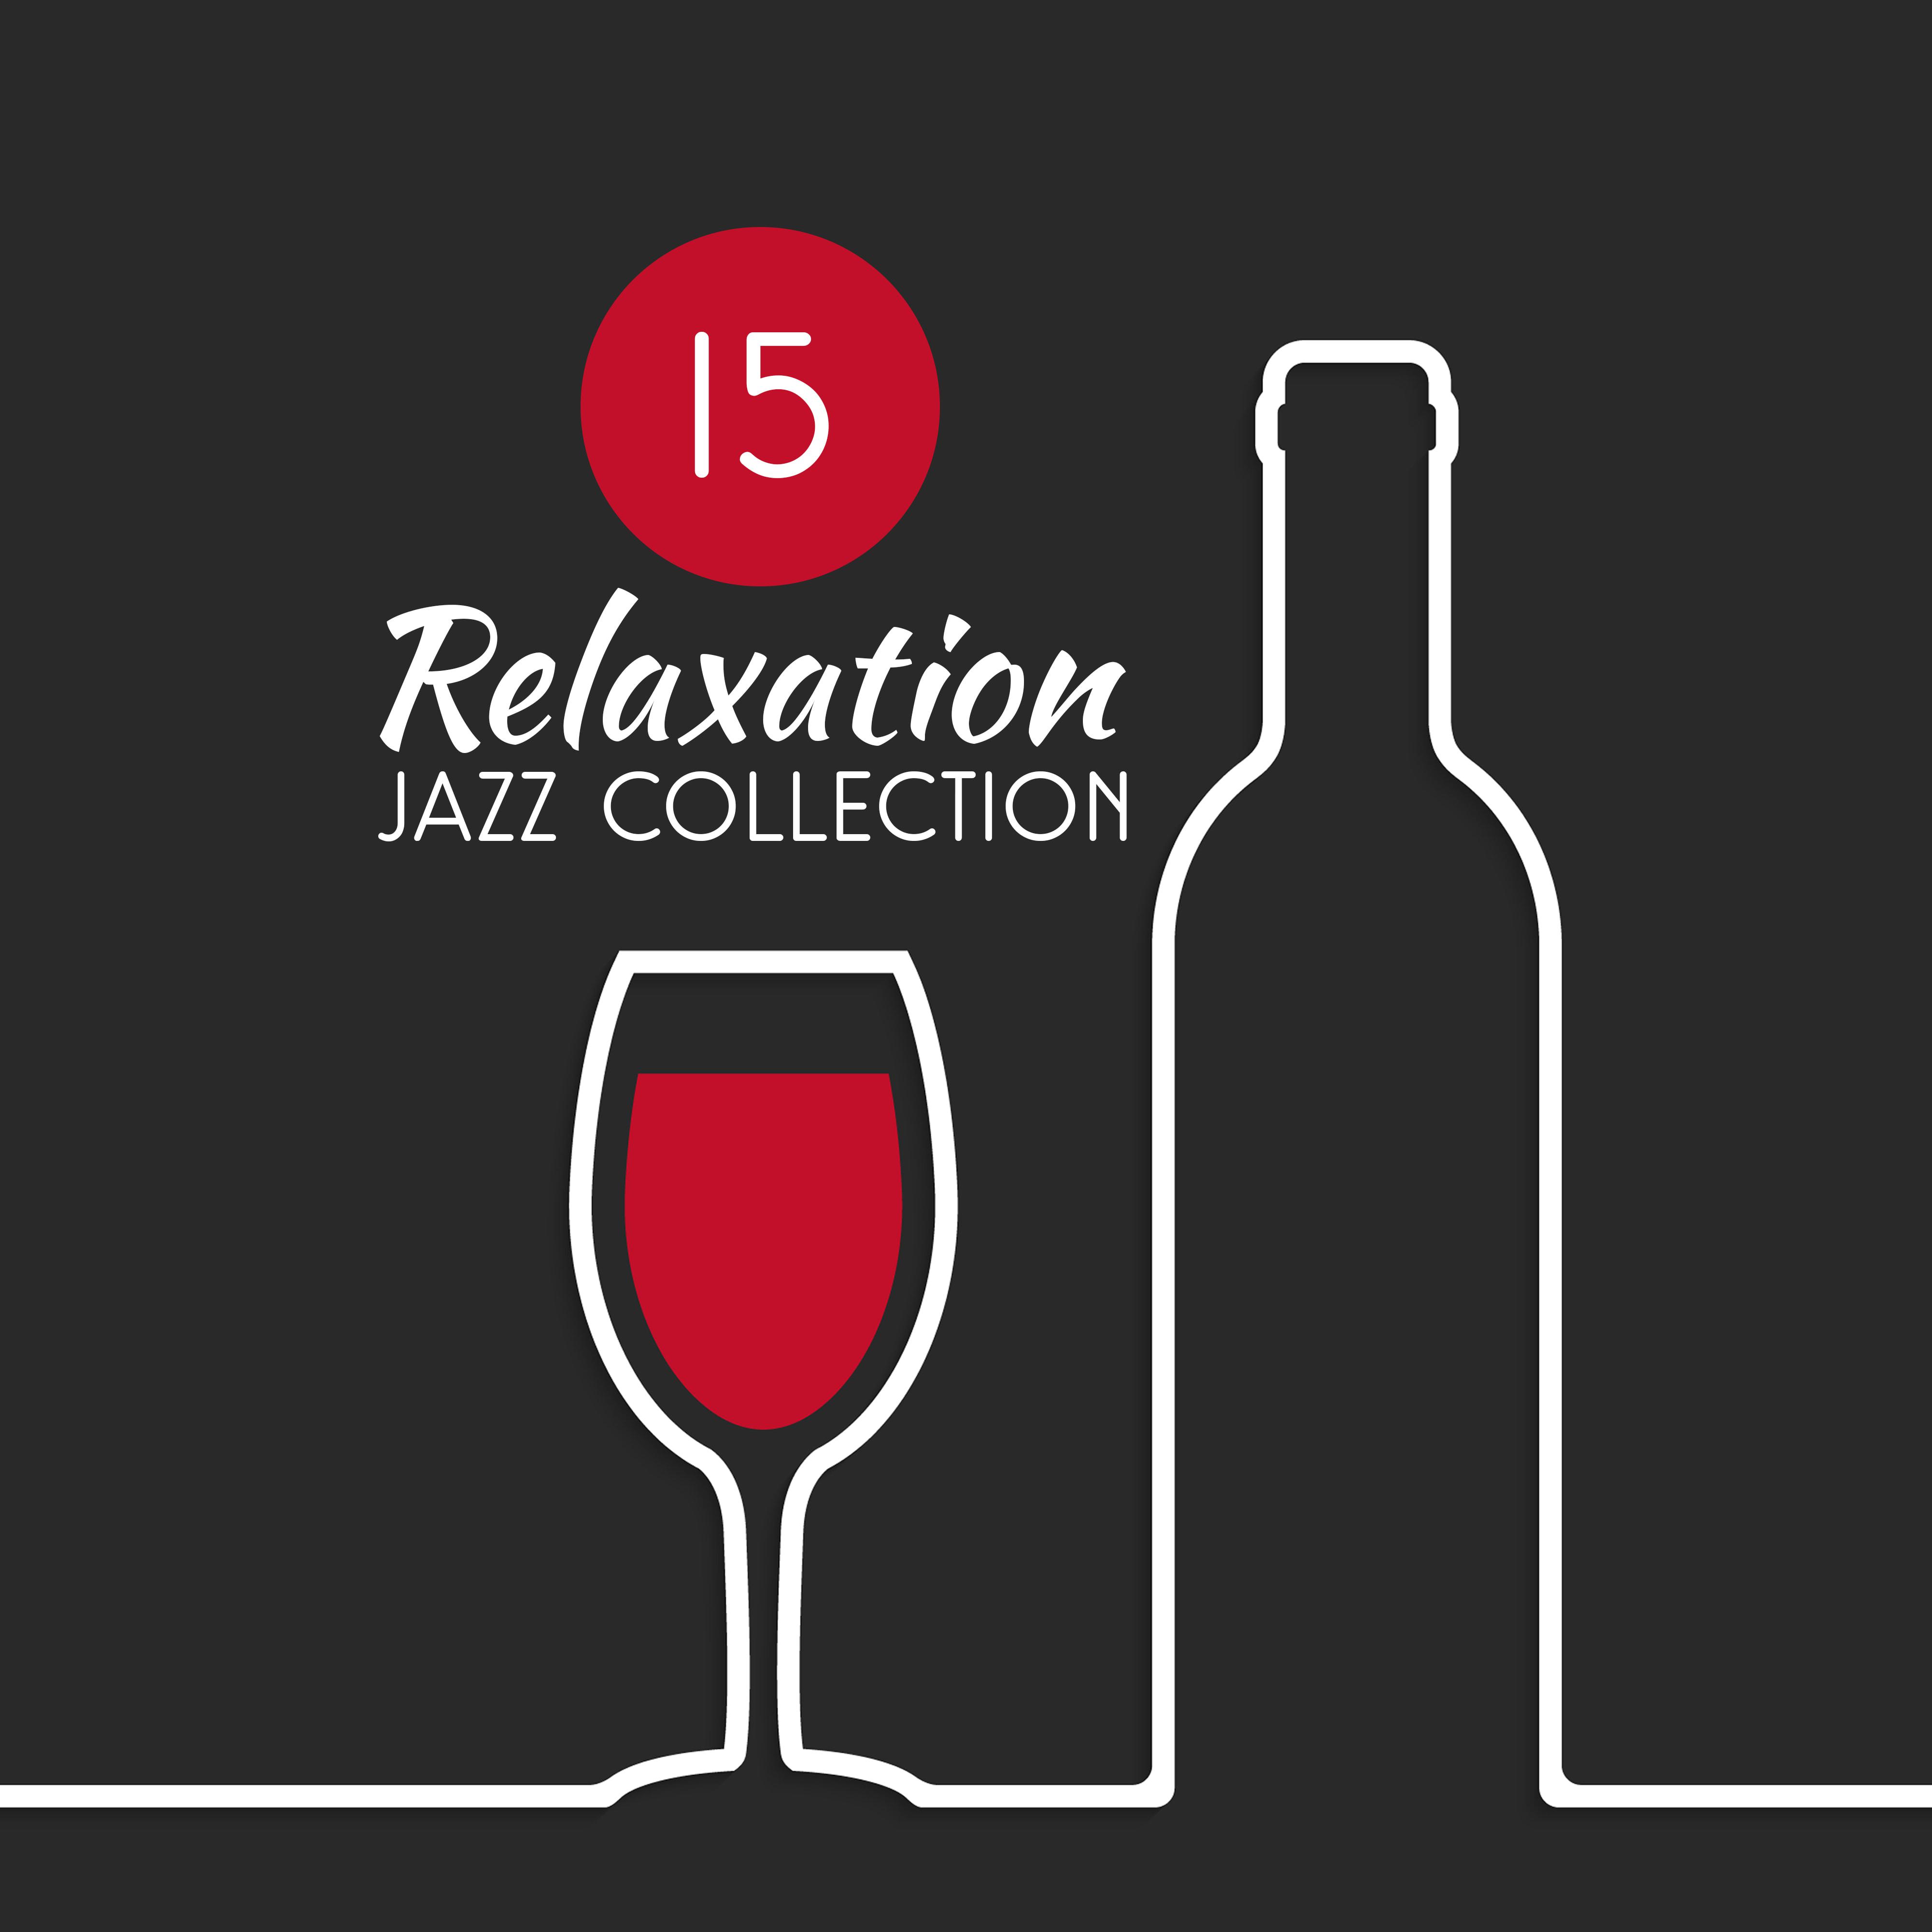 15 Relaxation Jazz Collection